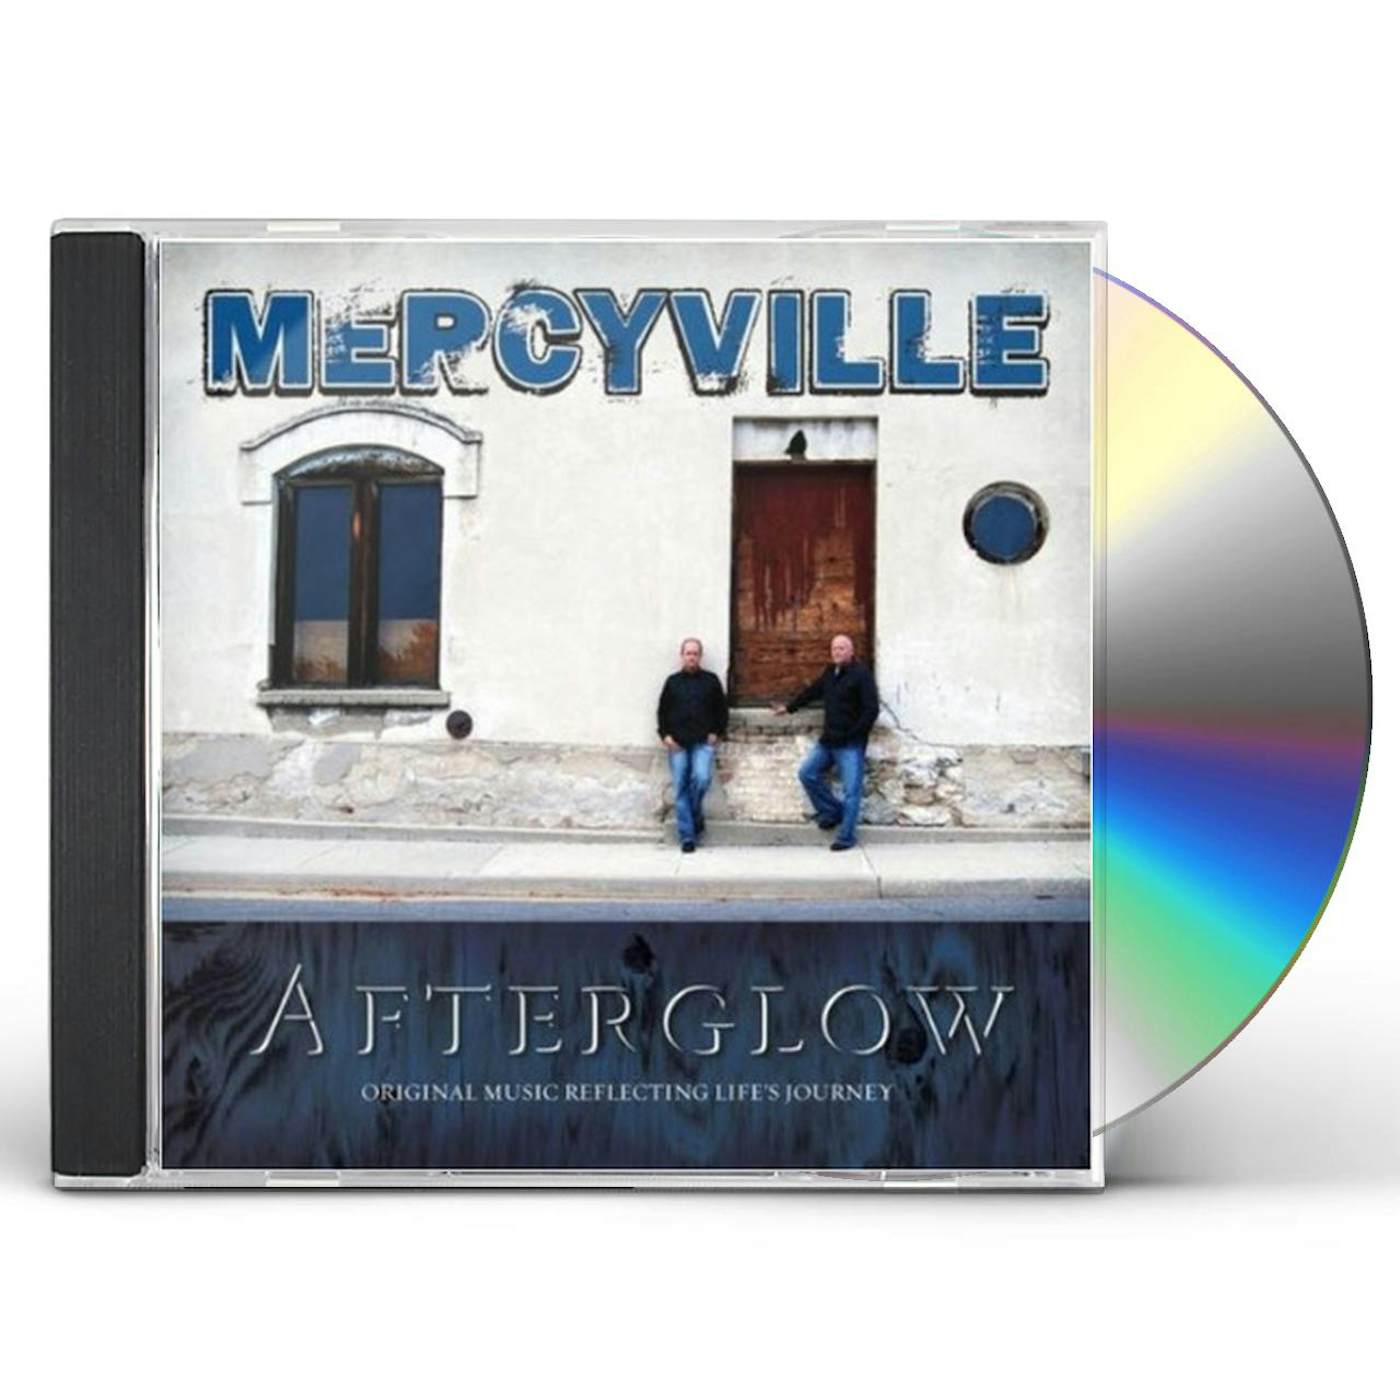 AFTERGLOW MERCYVILLE CD